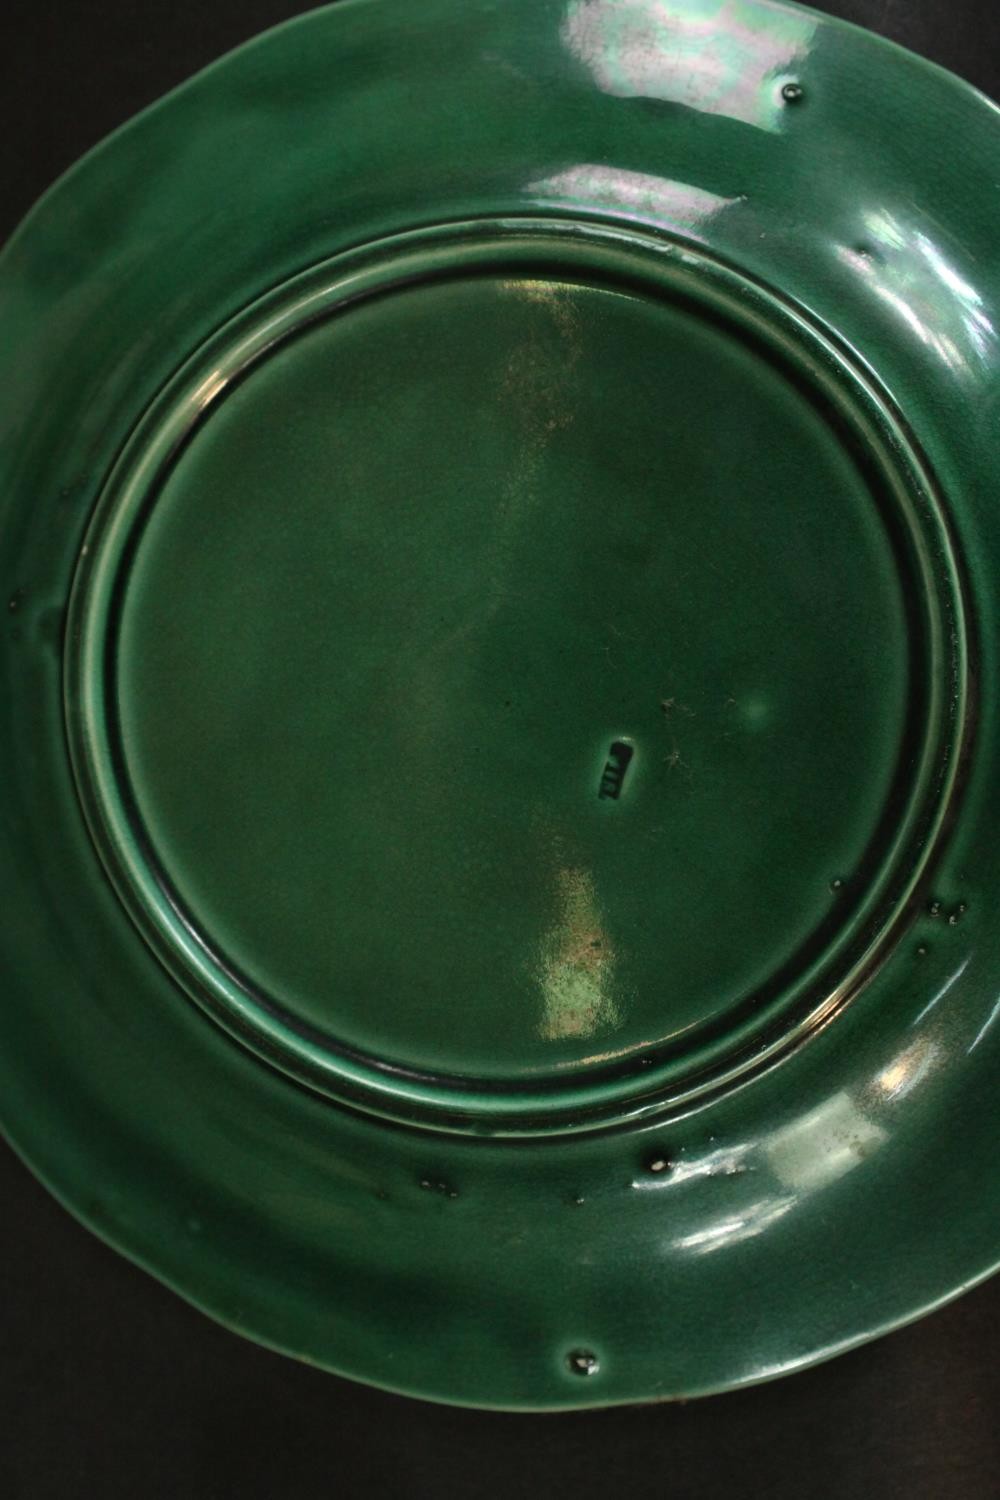 A collection of Royal Doulton Merryweather plates and bowls, along with a 19th century green glaze - Image 8 of 14